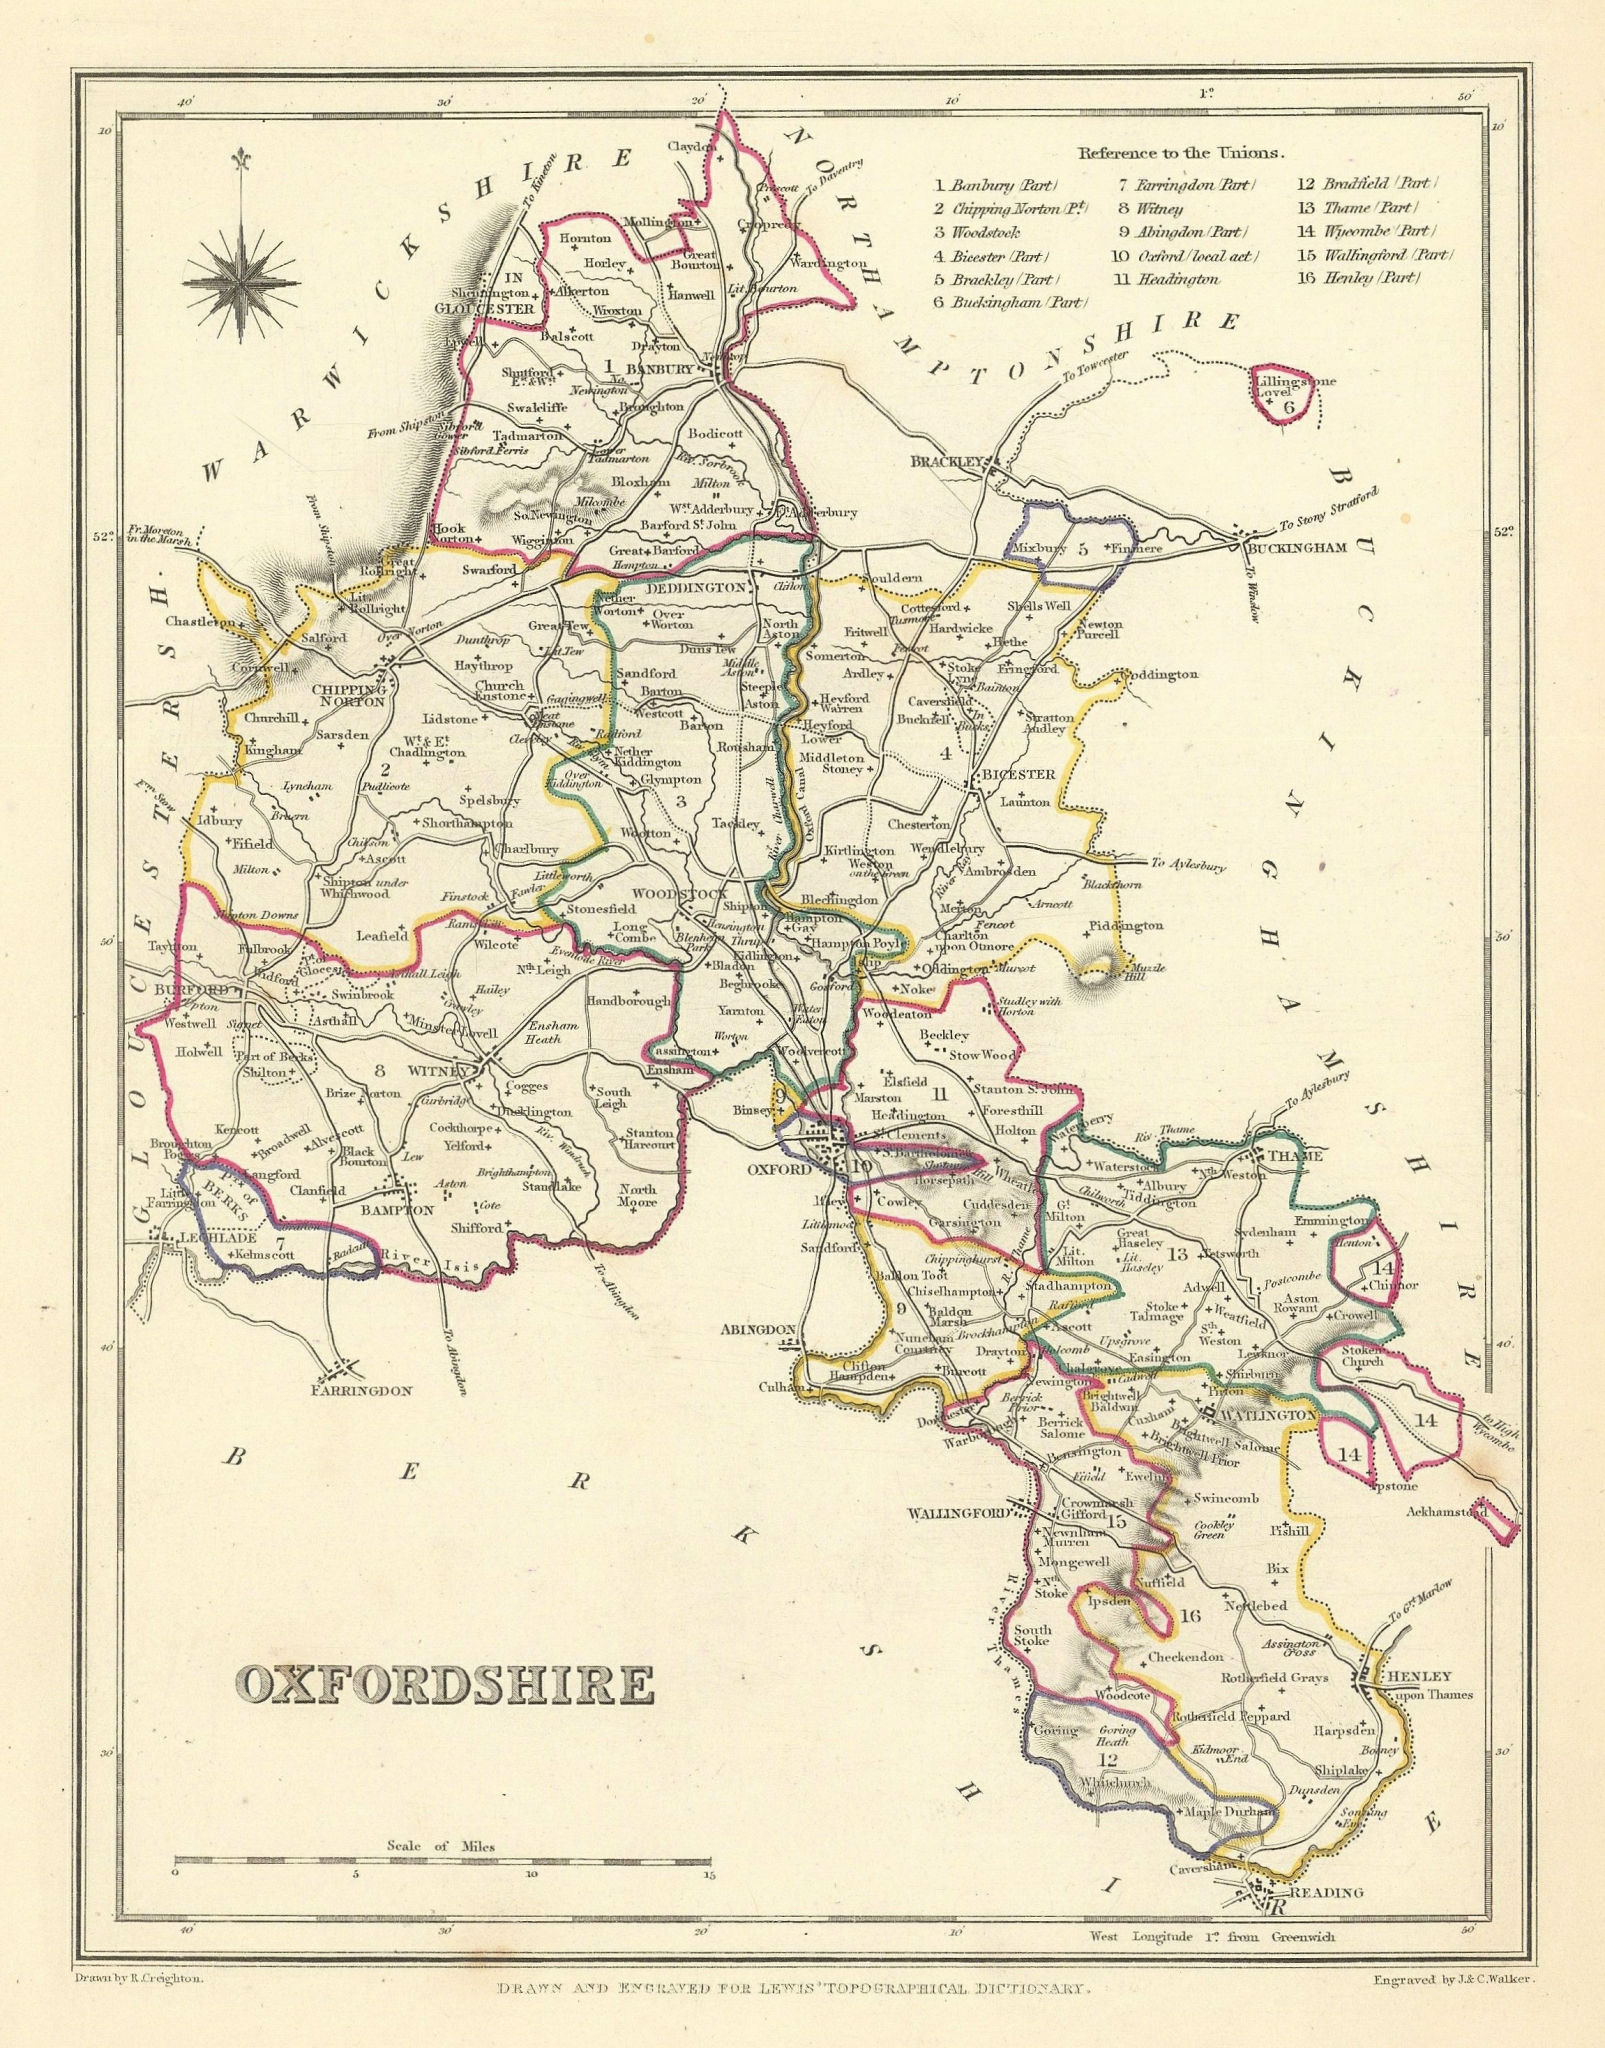 Associate Product Antique county map of OXFORDSHIRE by Creighton & Walker for Lewis c1840